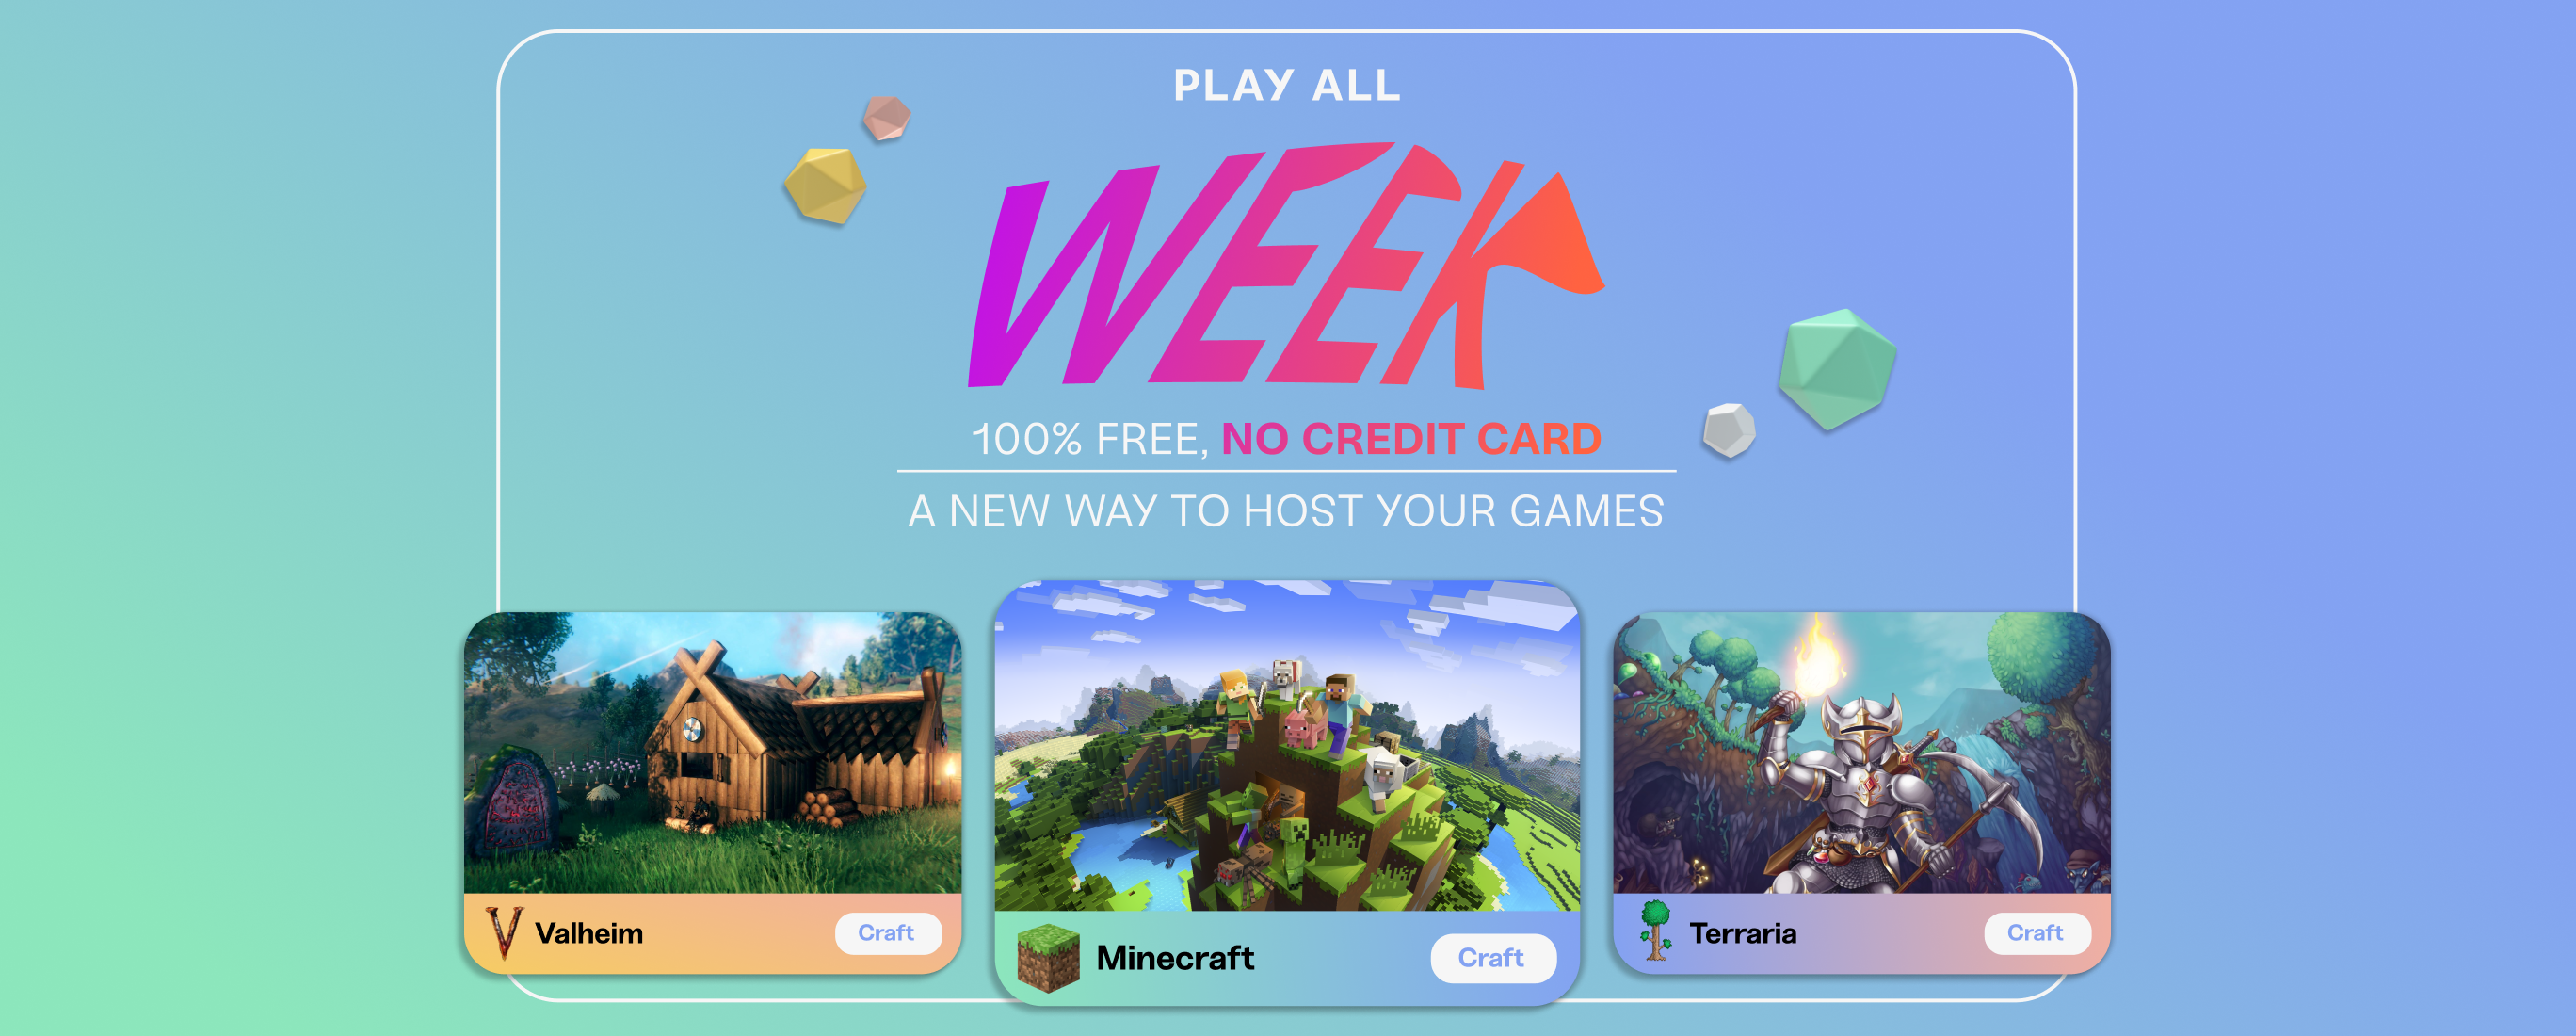 Play all week long on a Haptic game server, no credit card needed. Play Minecraft, Valheim, Terraria, and more all on your own private server, all for free.